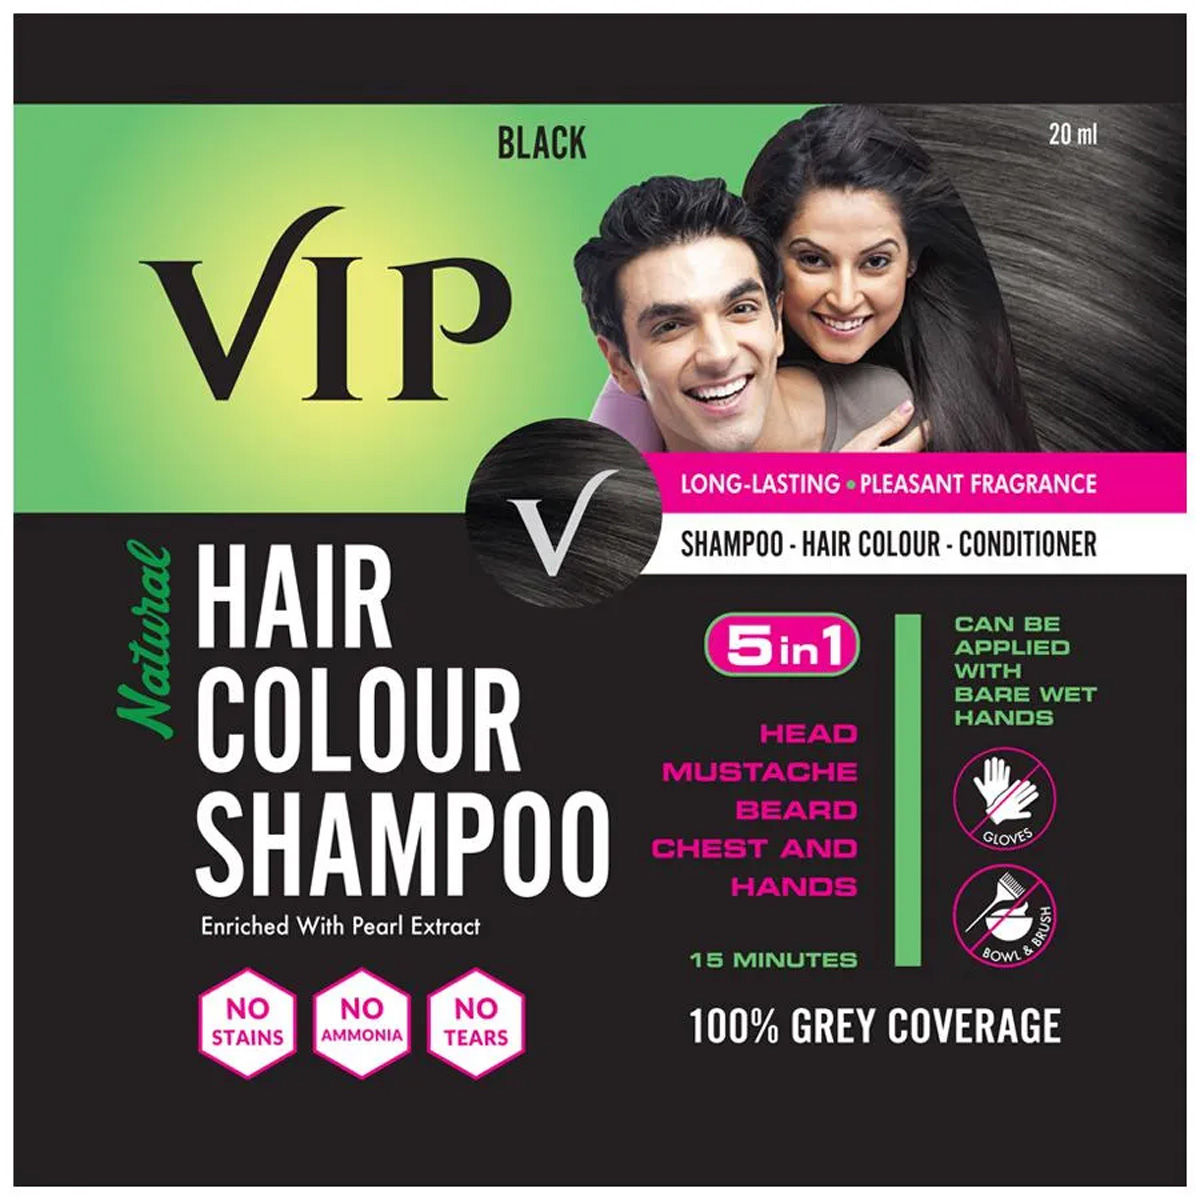 VIP Natural Black Hair Colour Shampoo, 20 ml Price, Uses, Side Effects,  Composition - Apollo Pharmacy